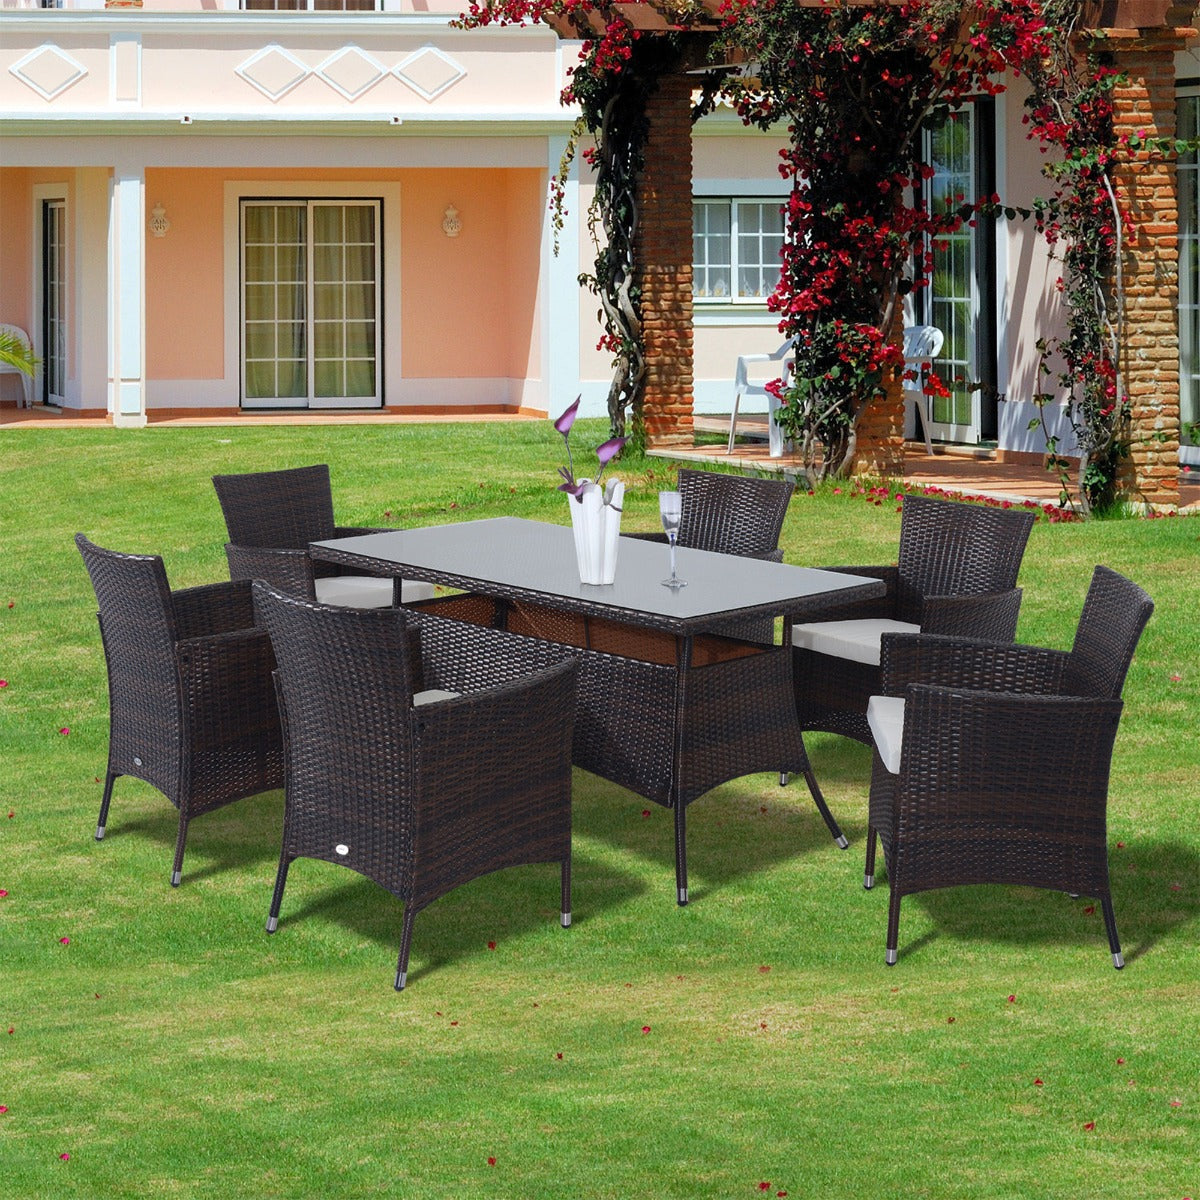 Outsunny 7 Pcs Rattan Dining Set-Brown